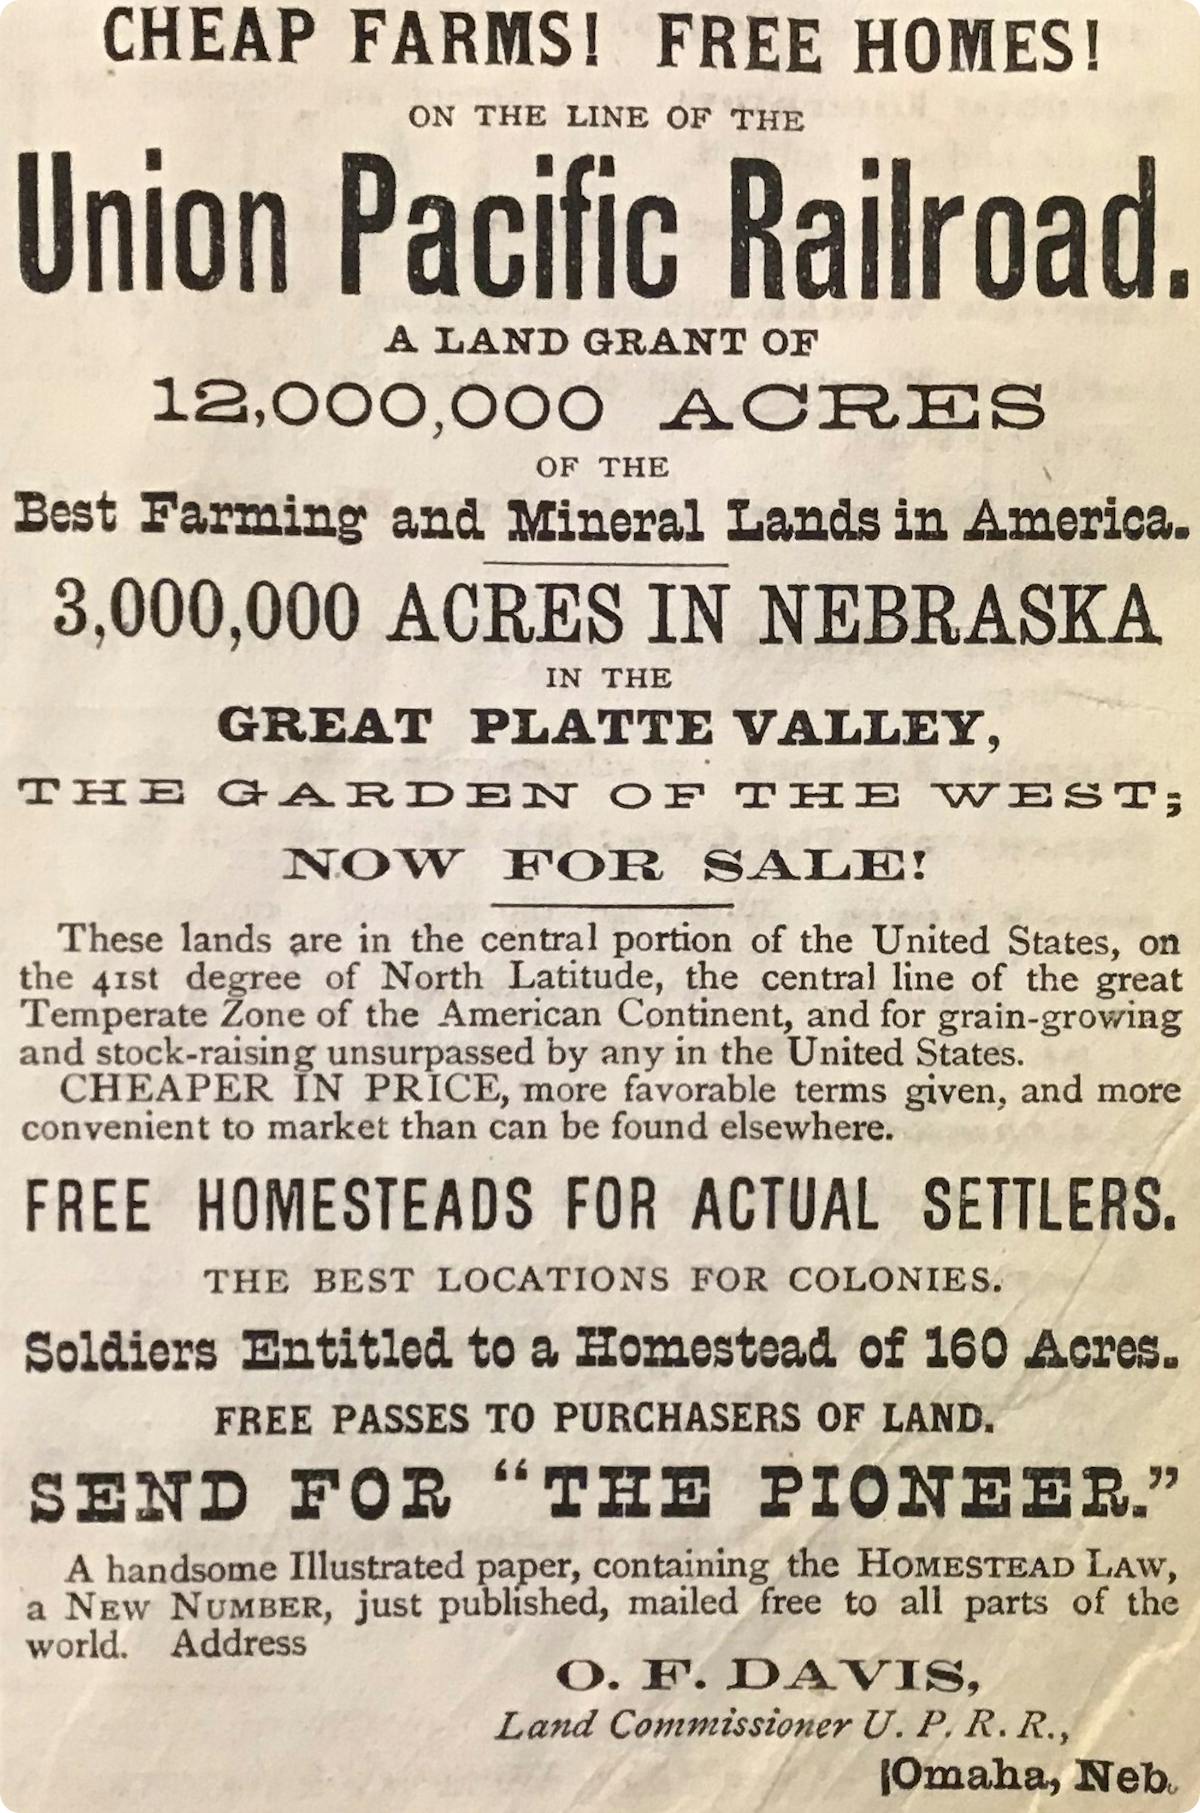 19th century adverts targeting US immigrants